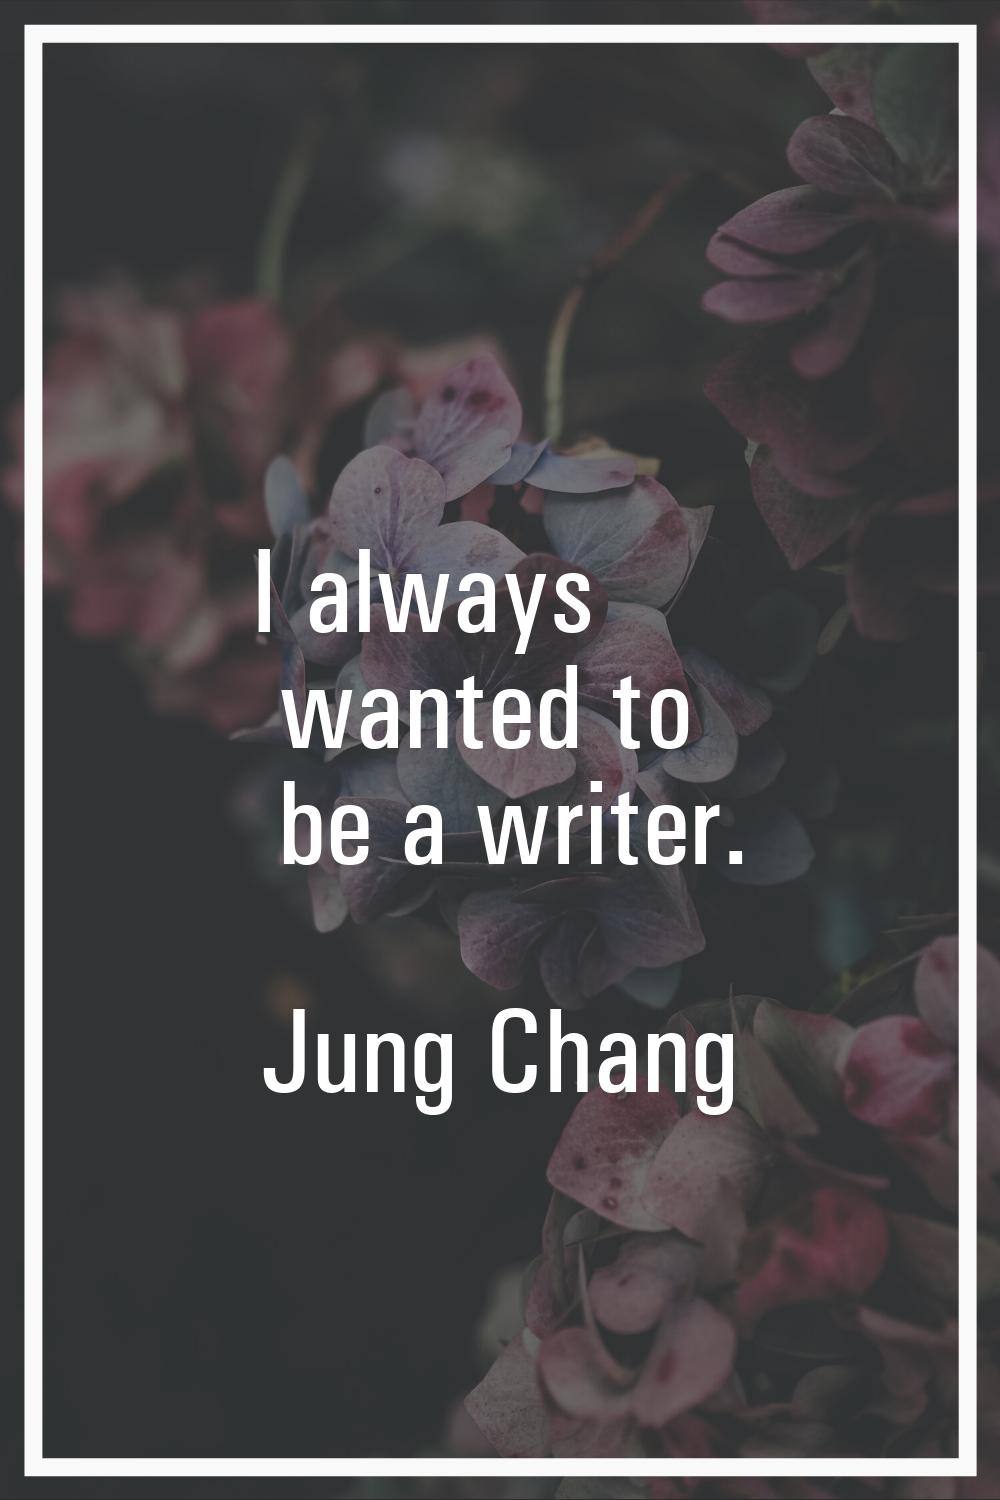 I always wanted to be a writer.